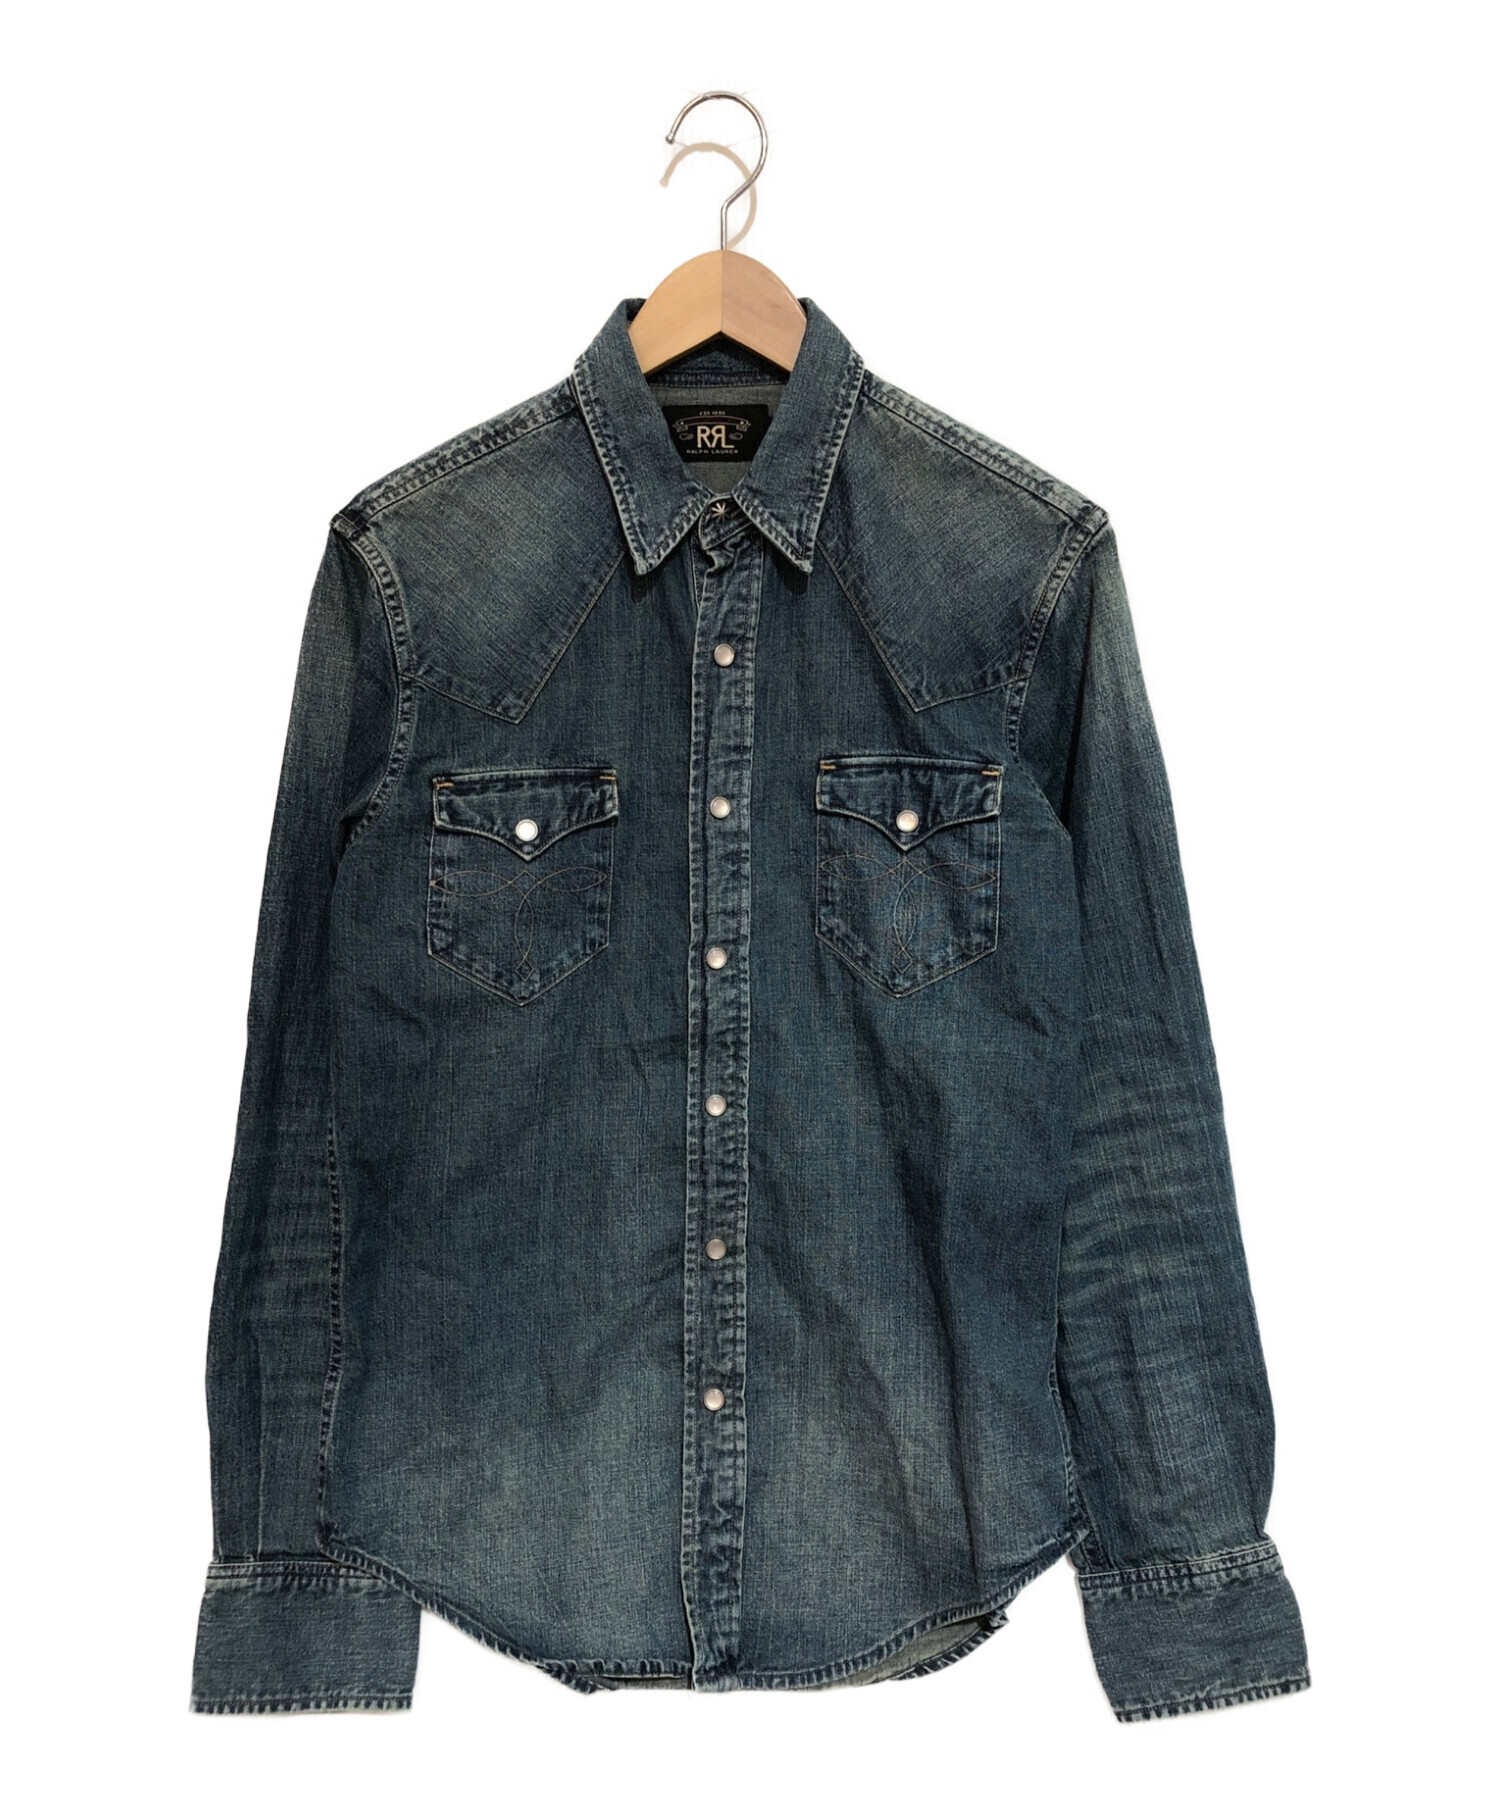 RRL シャツ/S 170/92A - www.fourthquadrant.in